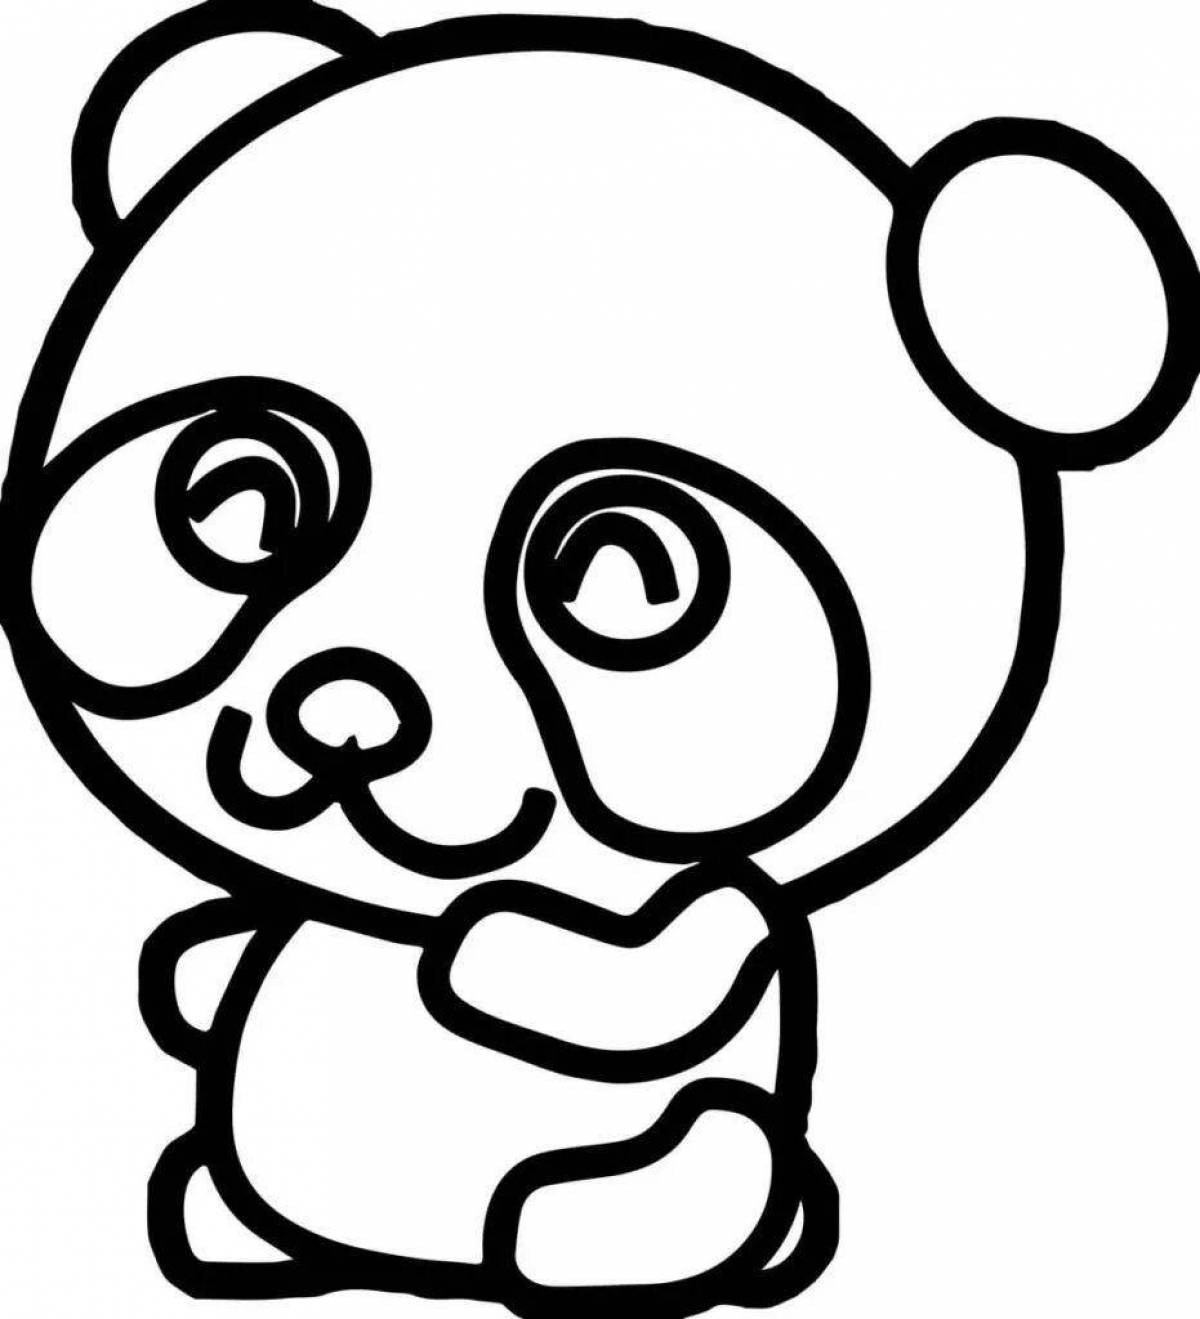 Exquisite panda coloring pages for girls